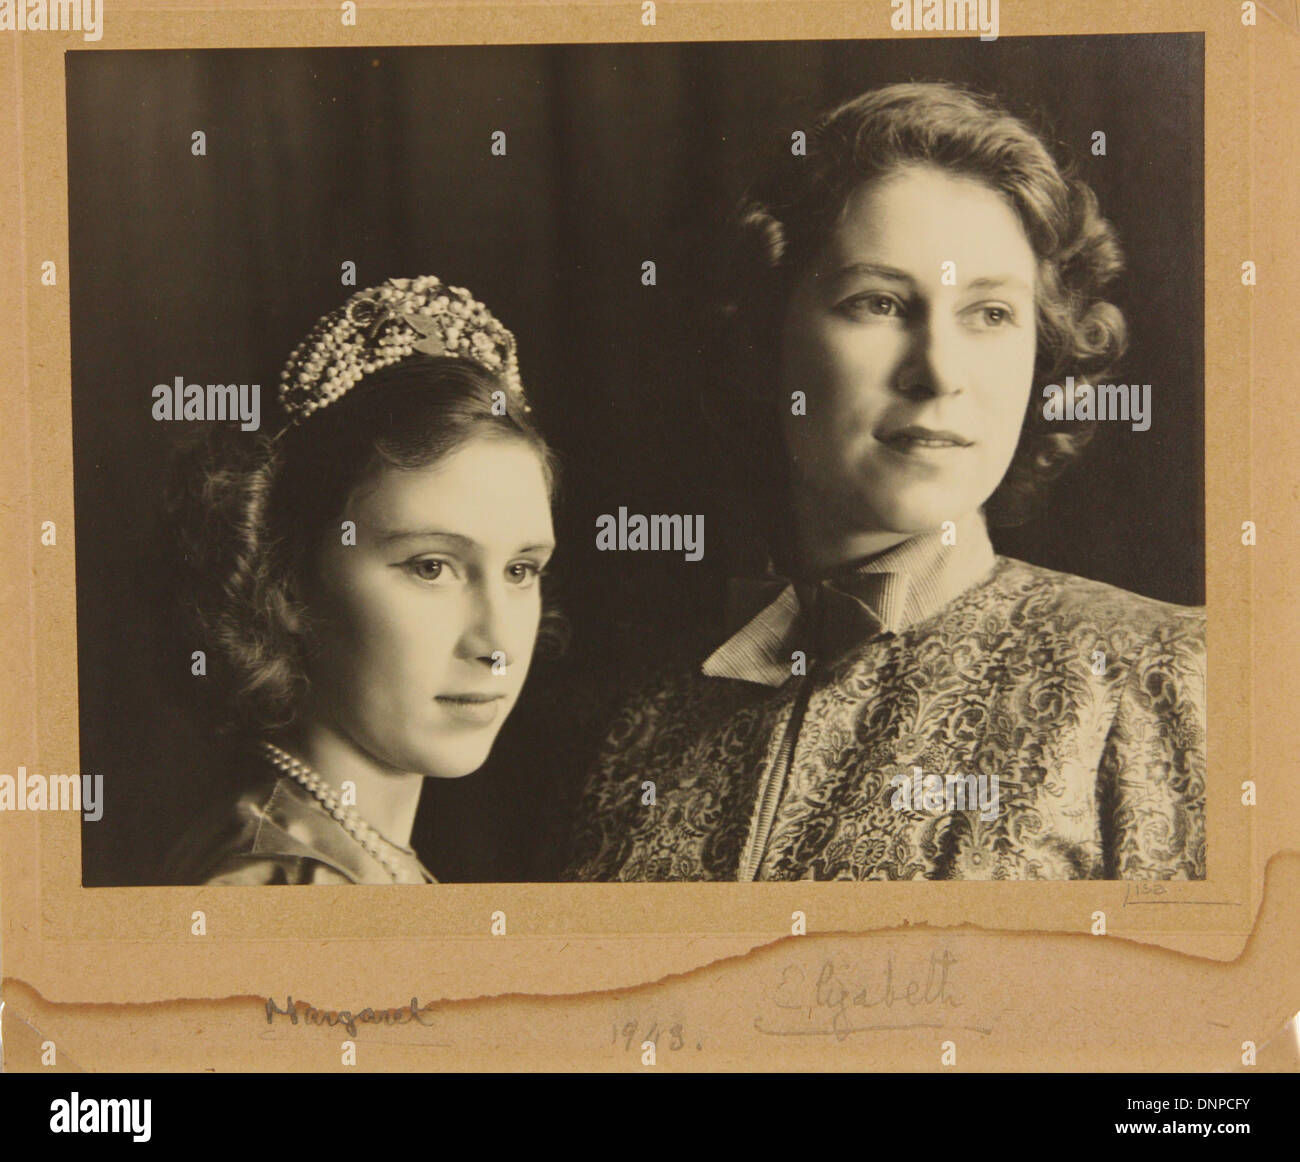 A signed photograph of Princess Margaret (left) and Princess Elizabeth (right) in the play Aladdin, 1943 Stock Photo